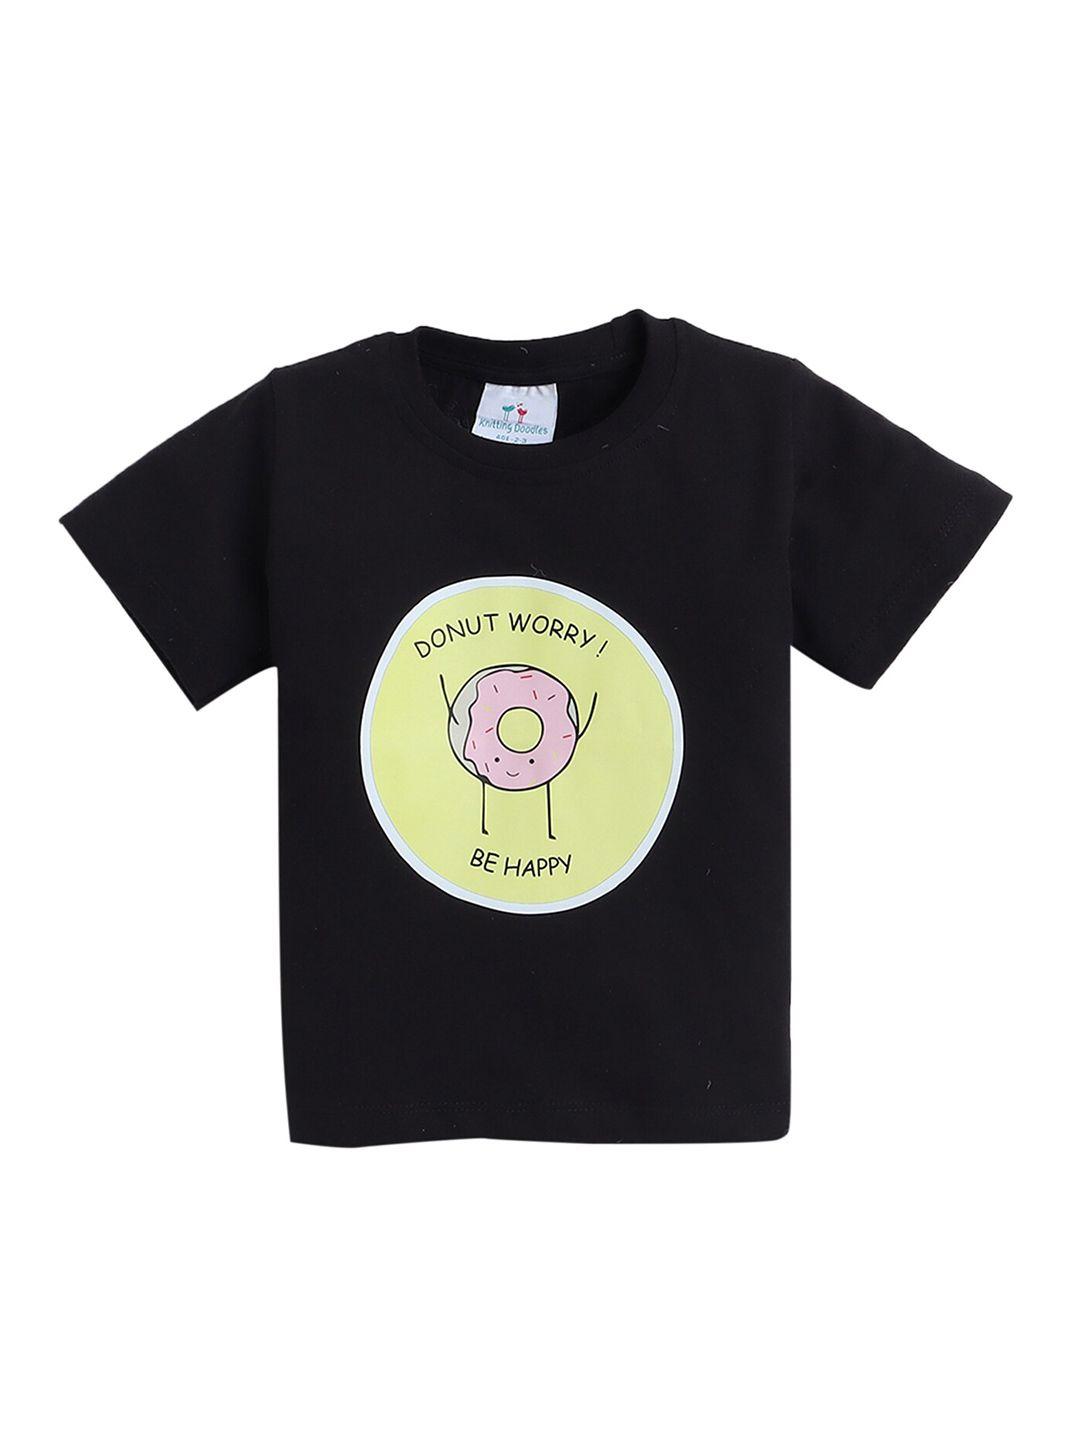 Knitting Doodles Boys Donut Worry Be Happy Printed Round Neck Regular Fit Cotton T-Shirt